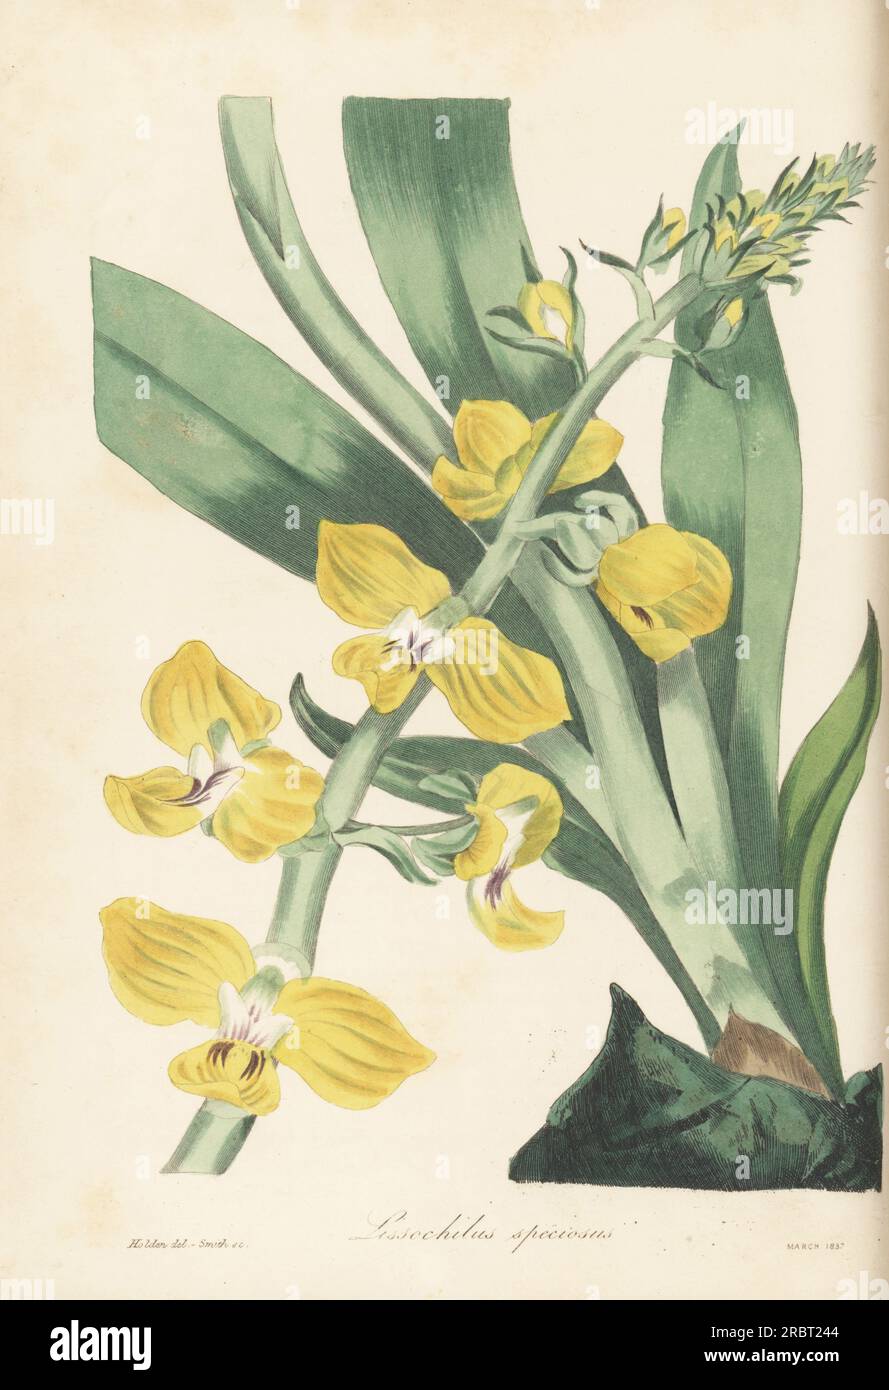 Eulophia speciosa orchid. Native to Africa, introduced from the Cape of Good Hope by nurseryman William Griffin of South Lambeth. Mr. Griffin's showy lissochilus, Lissochilus speciosus. Handcoloured engraving by Frederick William Smith after a botanical illustration by Samuel Holden from Joseph Paxton’s Magazine of Botany, and Register of Flowering Plants, Volume 4, Orr and Smith, London, 1837. Stock Photo